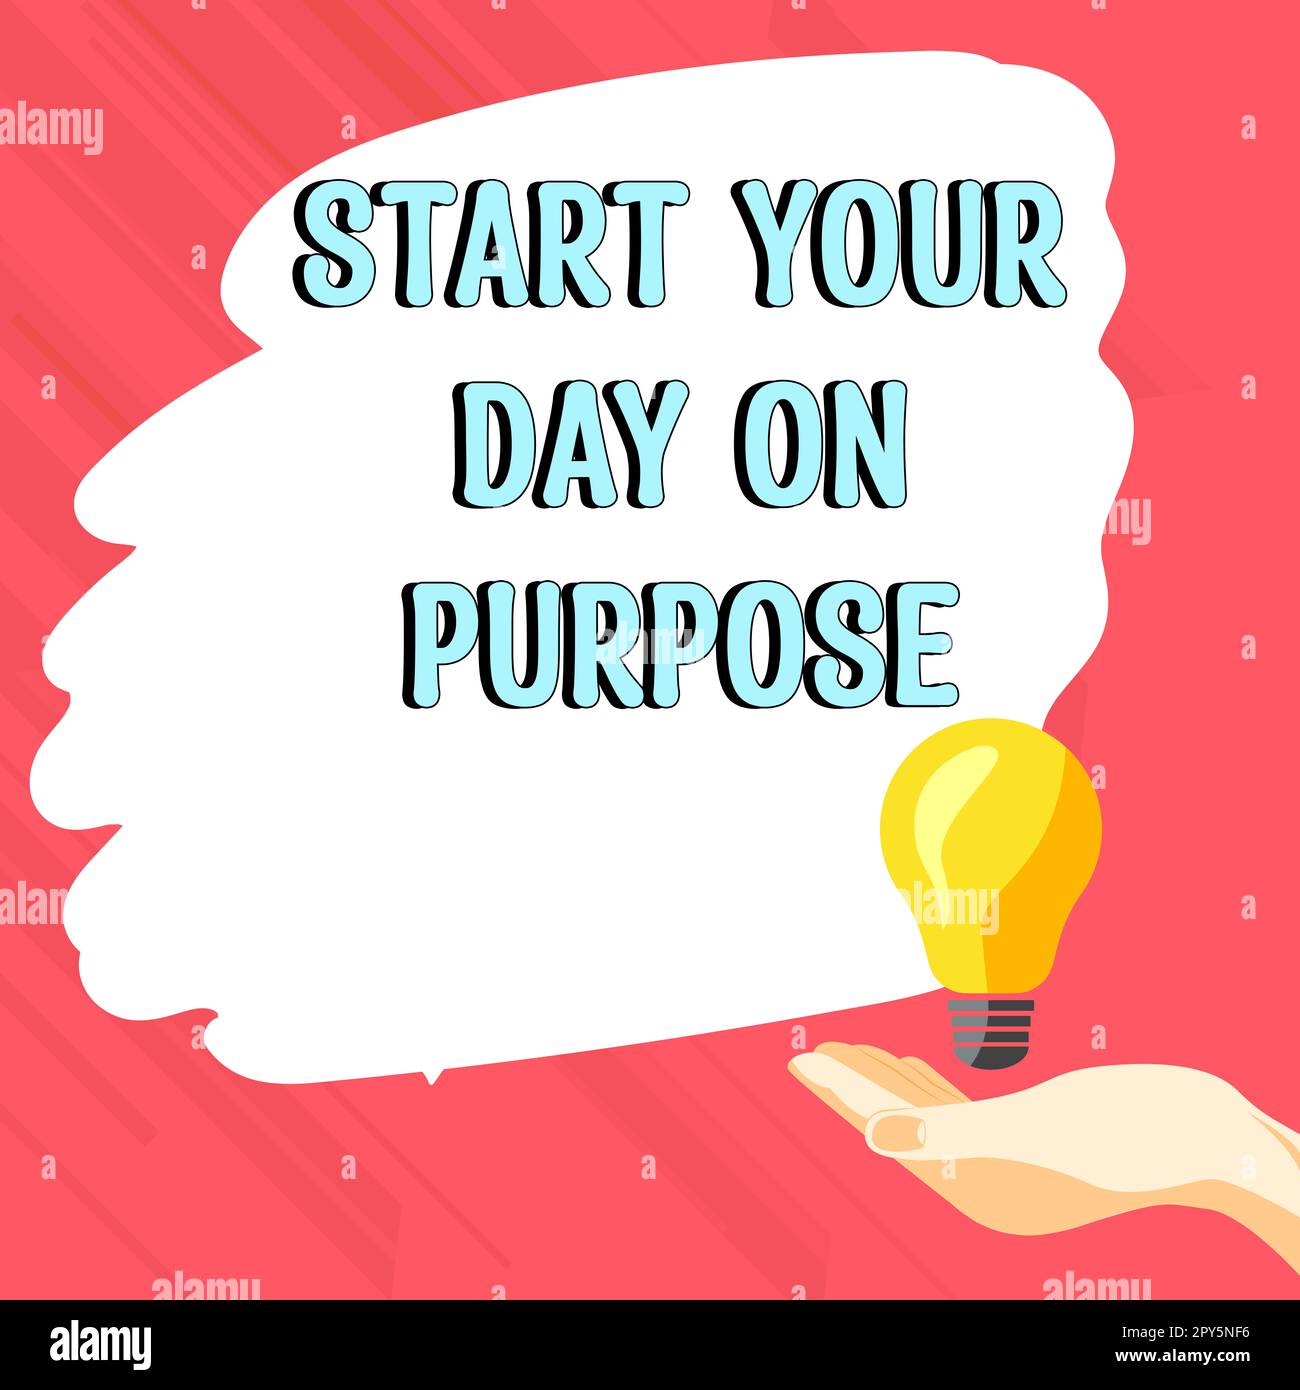 Text showing inspiration Start Your Day On Purpose. Business idea Have clean ideas of what you are going to do Stock Photo